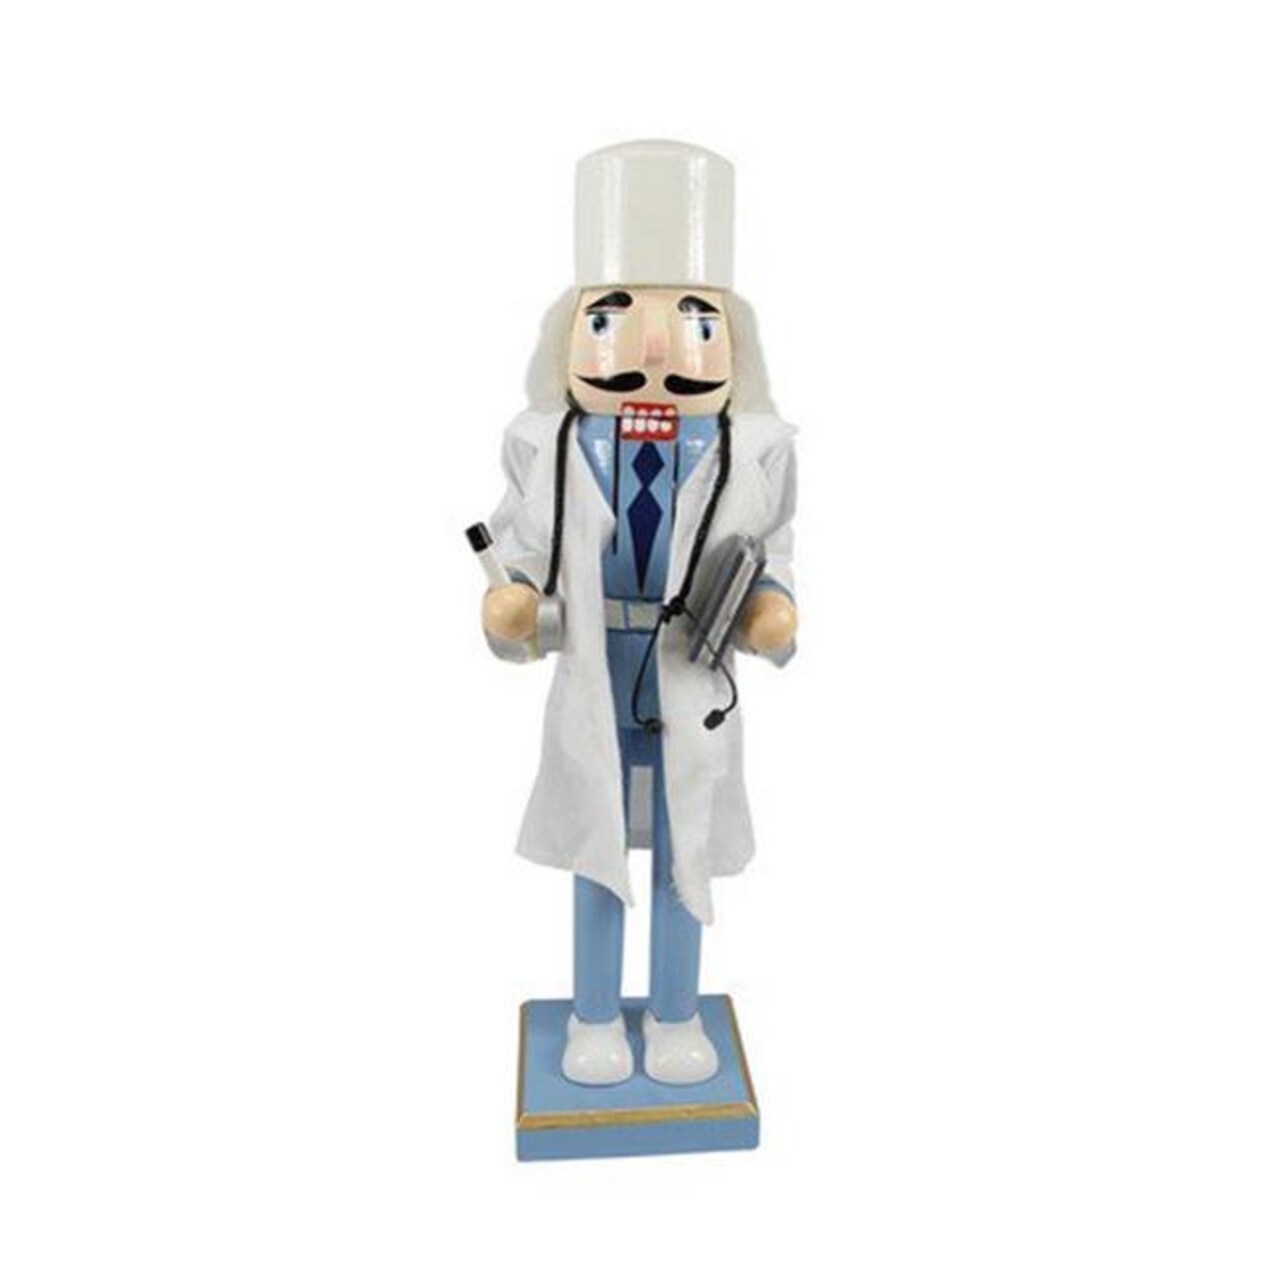 NorthLight 14 in. Decorative Wooden Christmas Nutcracker Doctor with Stethoscope